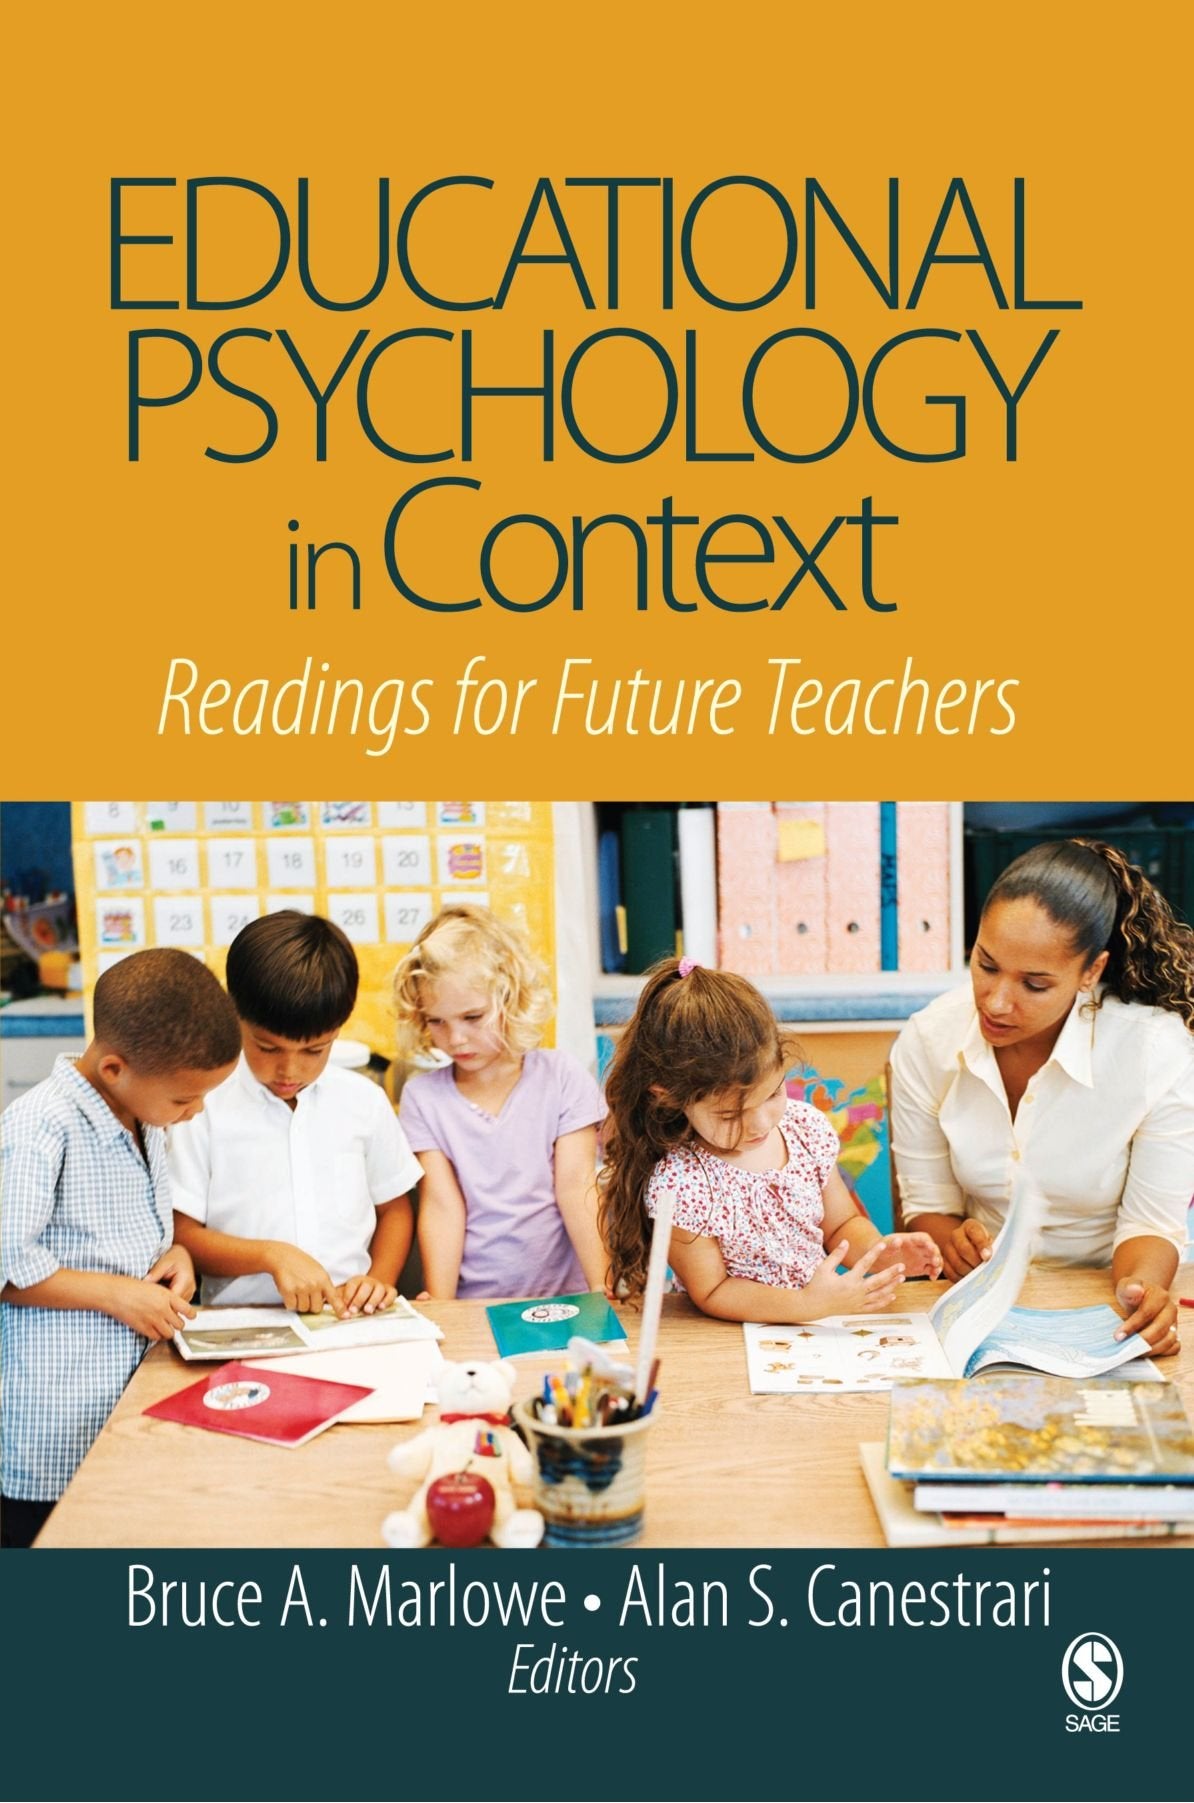 EDUCATIONAL PSYCHOLOGY IN CONTEXT - Virginia Book Company